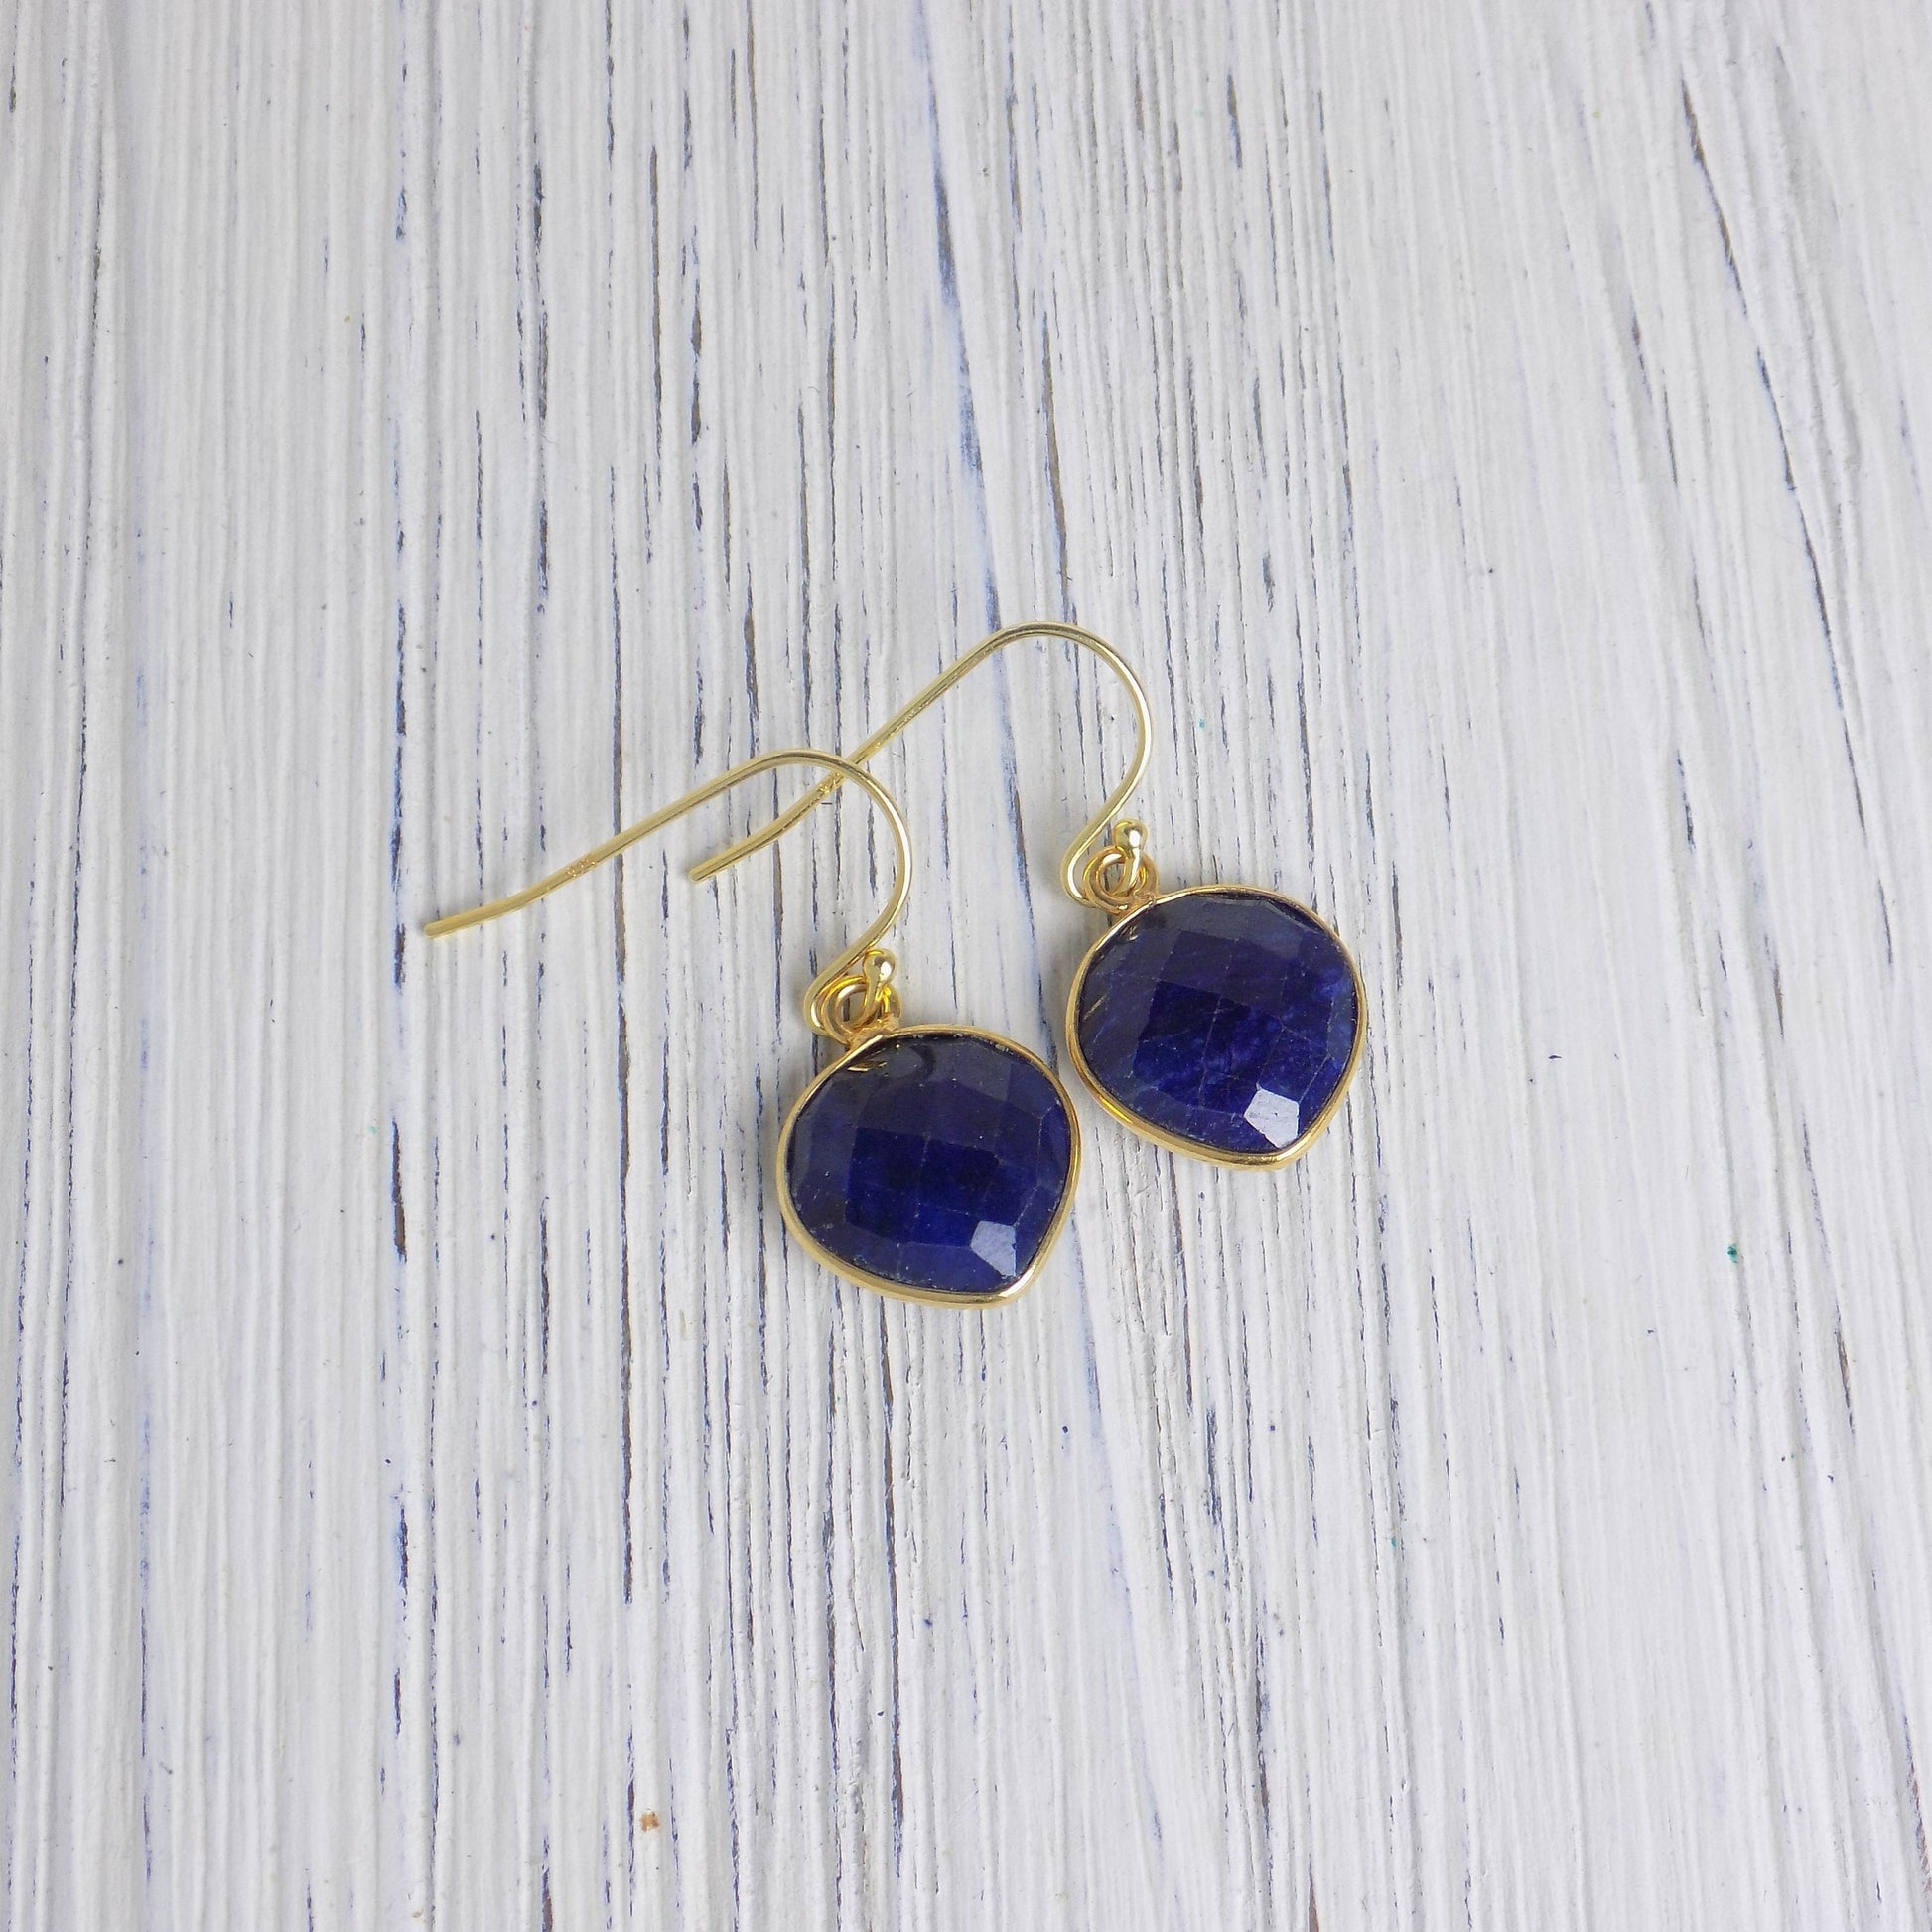 Blue Sapphire Drop Earrings Gold, Gifts For Mom, M5-383